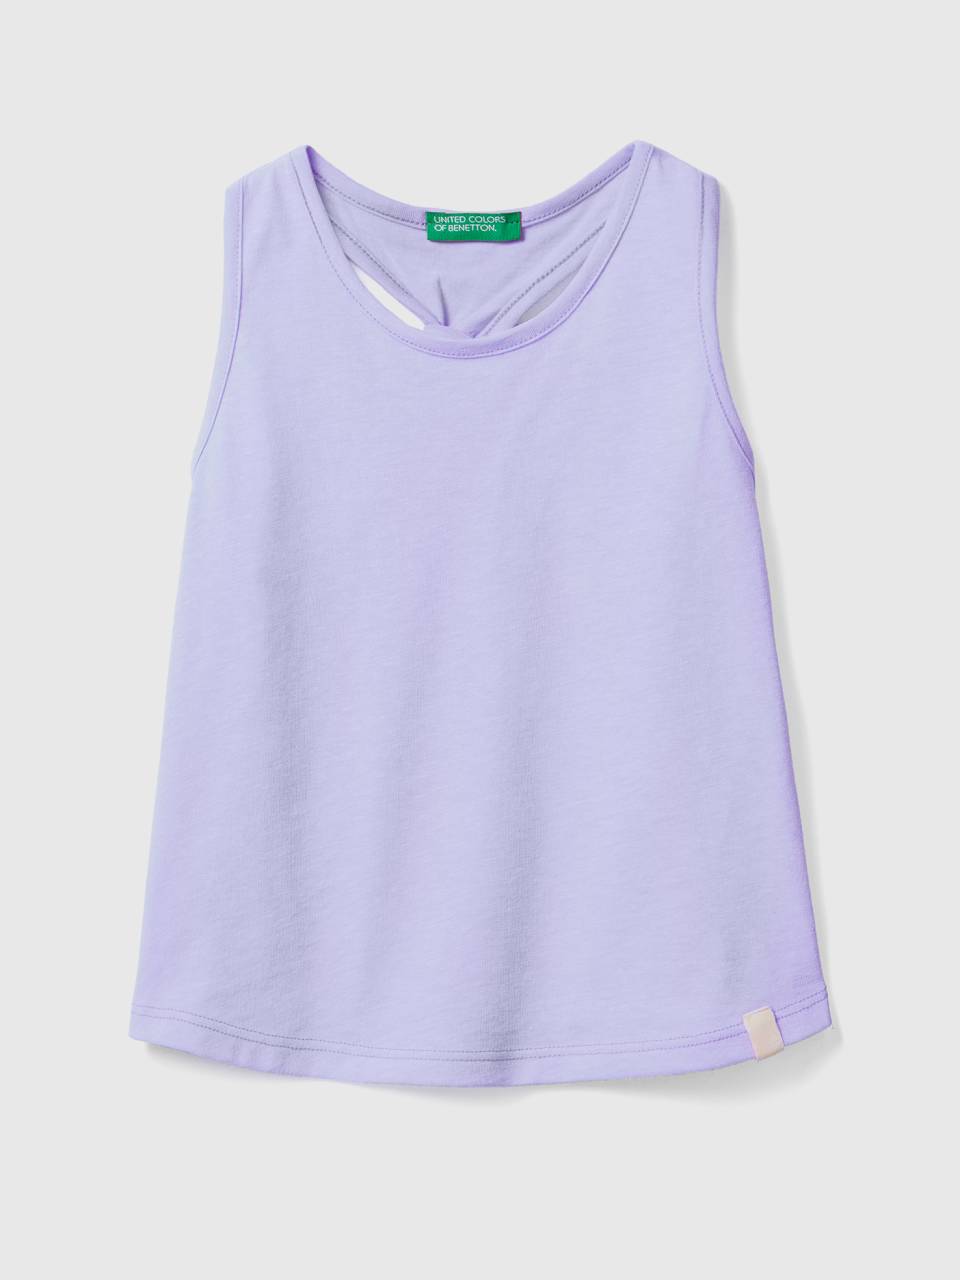 Benetton tank top with back knot in recycled fabric. 1